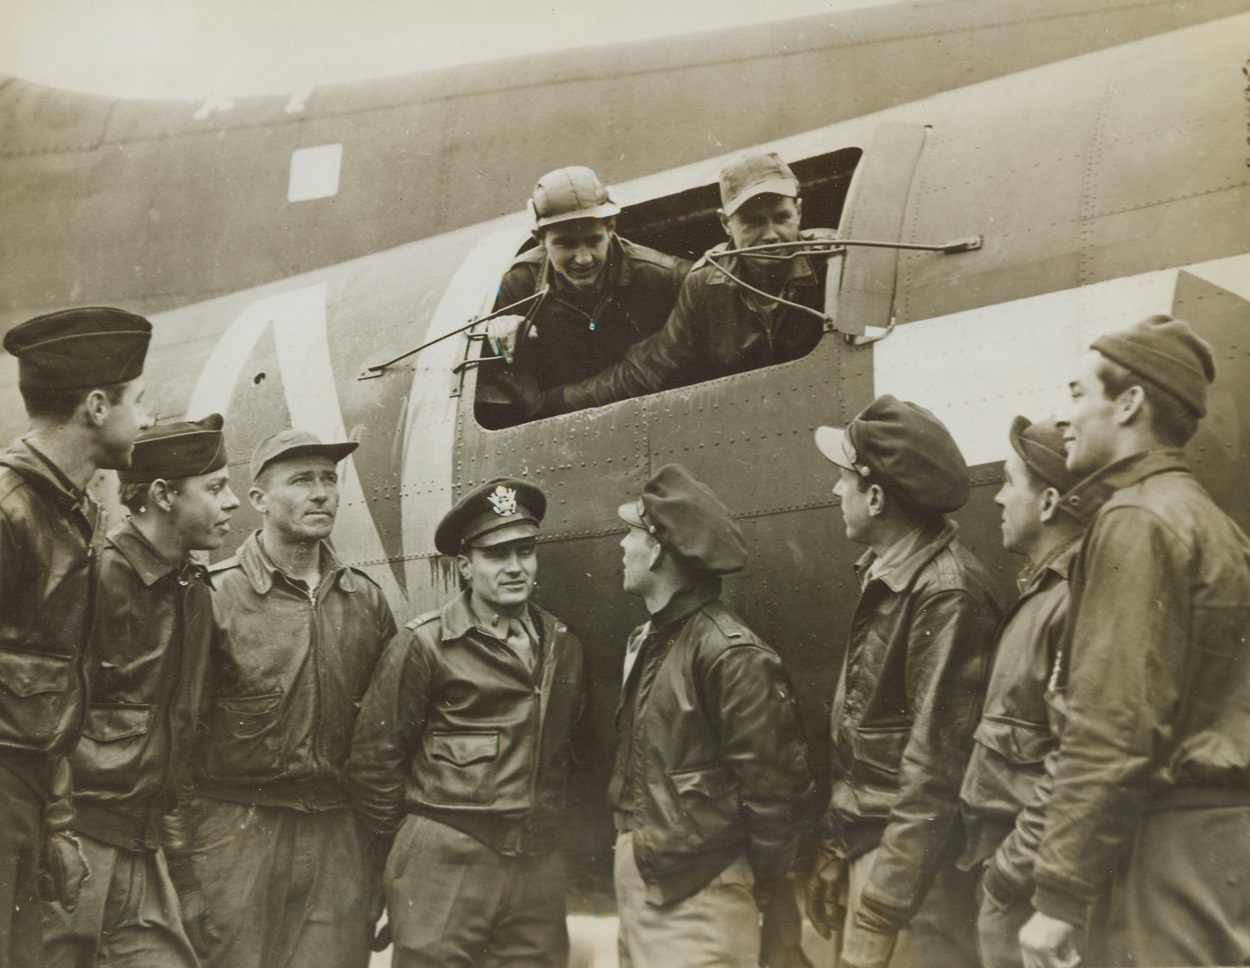 They Got Home!, 2/20/1944. England - These boys had to jettison everything, including the Ball Turret, to get their Flying Fortress home after two engines had been knocked out by flak during a raid over Frankfort. Left to right: 2nd Lt. William C. Johnson, pilot, of Lewis Chapel, Tenn.; Ball Turret Gunner Sgt. David E. Cameron, Boothwin, PA; Radio Operator S/Sgt Ruben Kisner, Doylestown, PA; Bombardier 2nd Lt. James P. Cain, Barnum, IA; Navigator 2nd Lt. William C. Gray, Wilkes Boro, N.C.; Co-Pilot 2nd Lt. Matt Farmer, Mankato, Minn.; Tail Gunner Sgt. Ed. J. Skiba, Aliquippa, PA; Top Turret Gunner S/Sgt Robert D. Cavanaugh, San Antonio, Texas; (and in window) Right Waist Gunner Sgt. Raymond G. Calvert, Detroit, Mich.; and Left Waist Gunner Sgt. Glenn E. Bratcher, Lamesa, Texas. Credit: U.S. Army Air Forces photo via OWI - ACME;